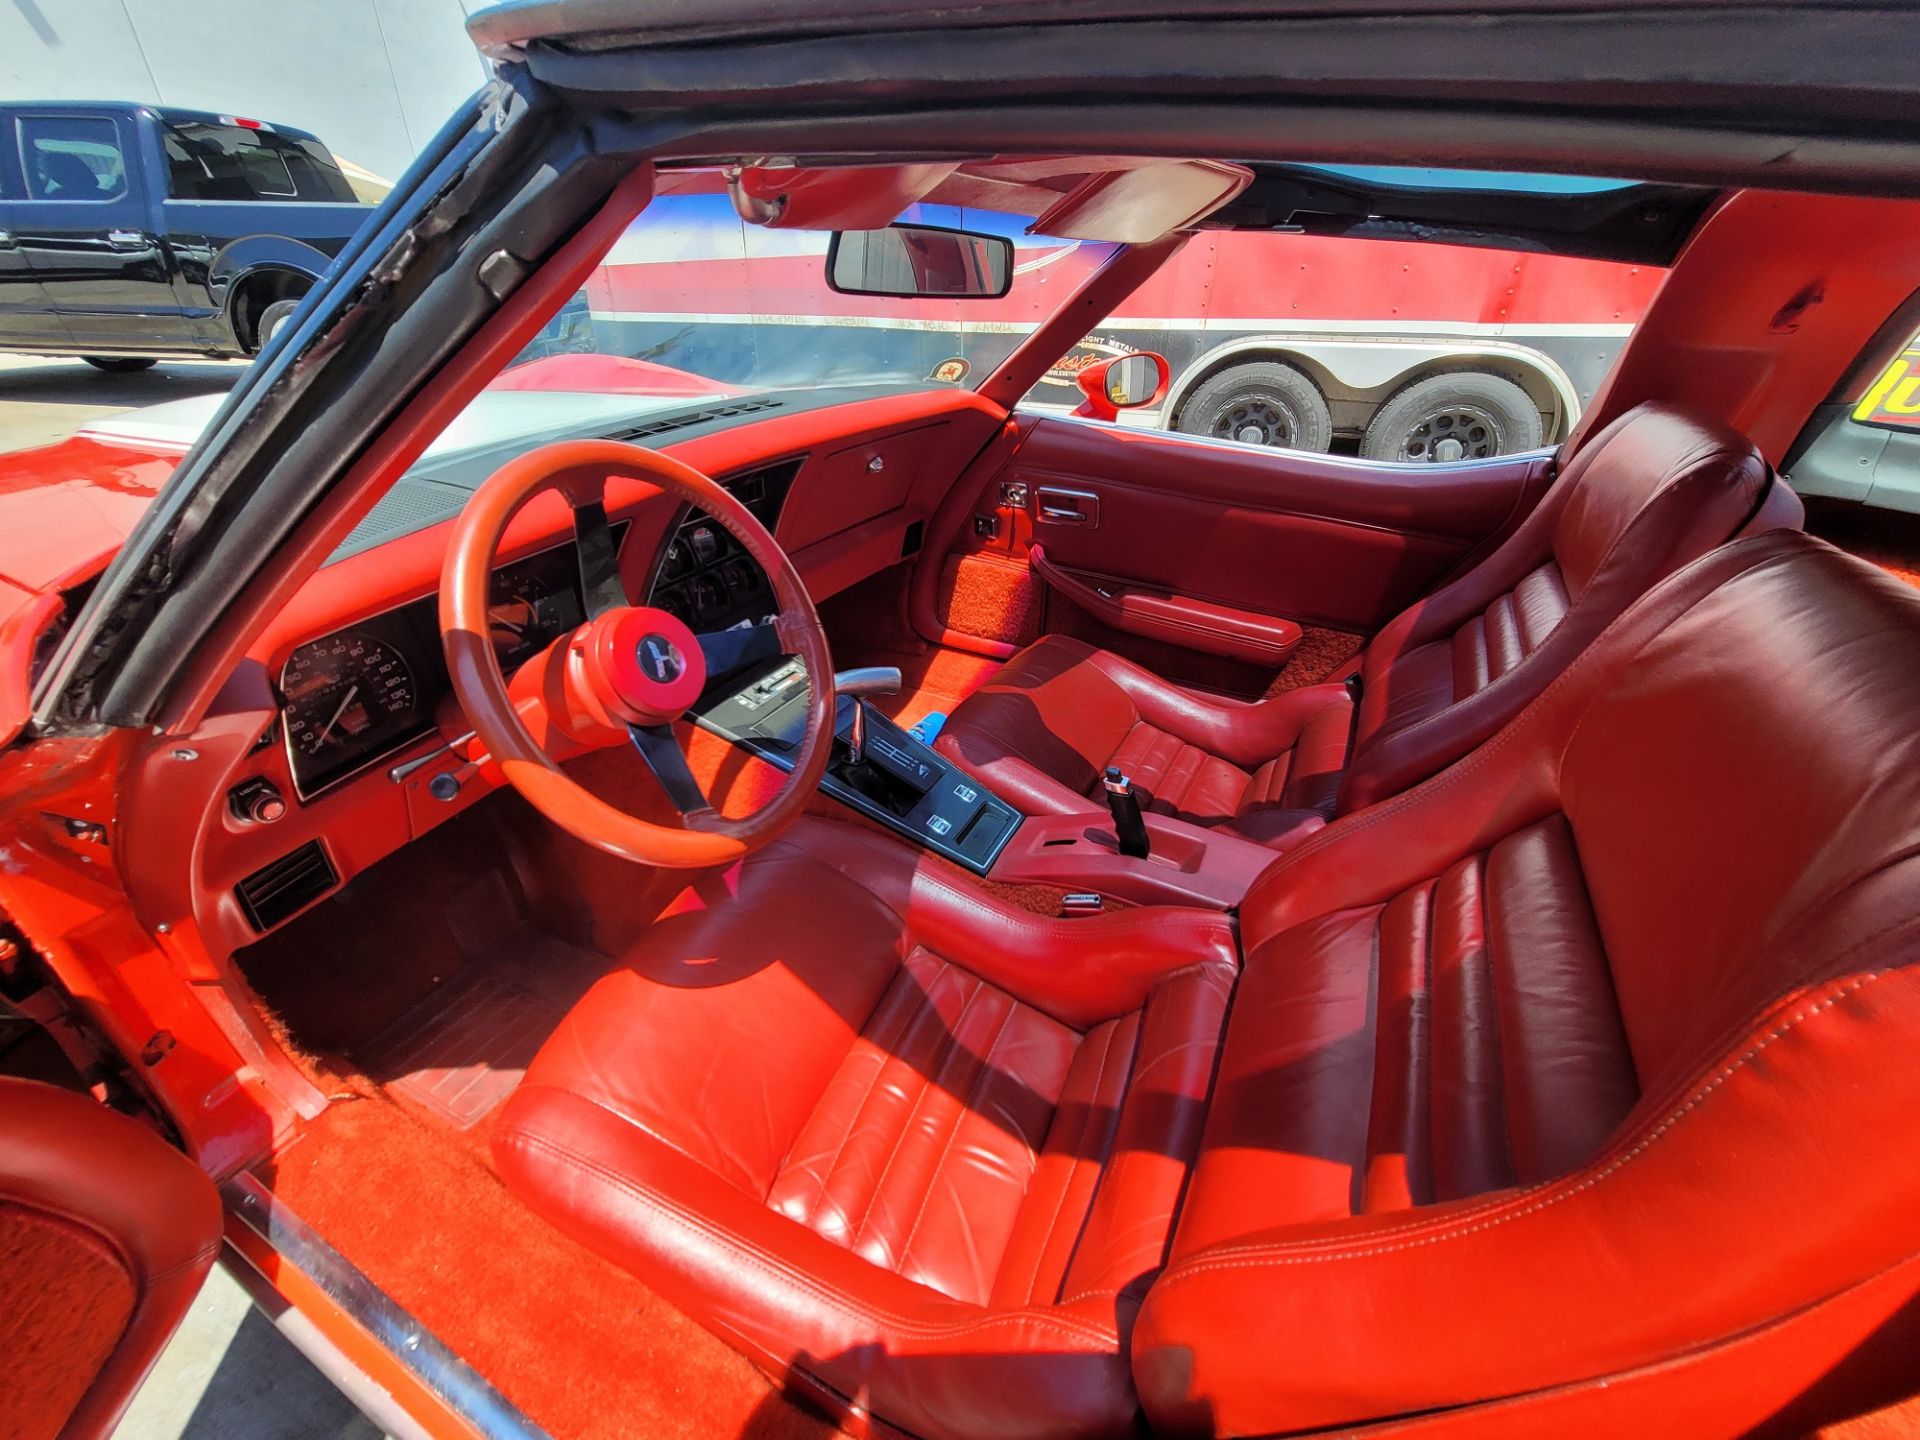 1980 CHEVROLET CORVETTE, WAS VIC EDELBROCK'S PERSONAL CAR BOUGHT FOR R&D, RED INTERIOR, TITLE ONLY. - Image 18 of 70